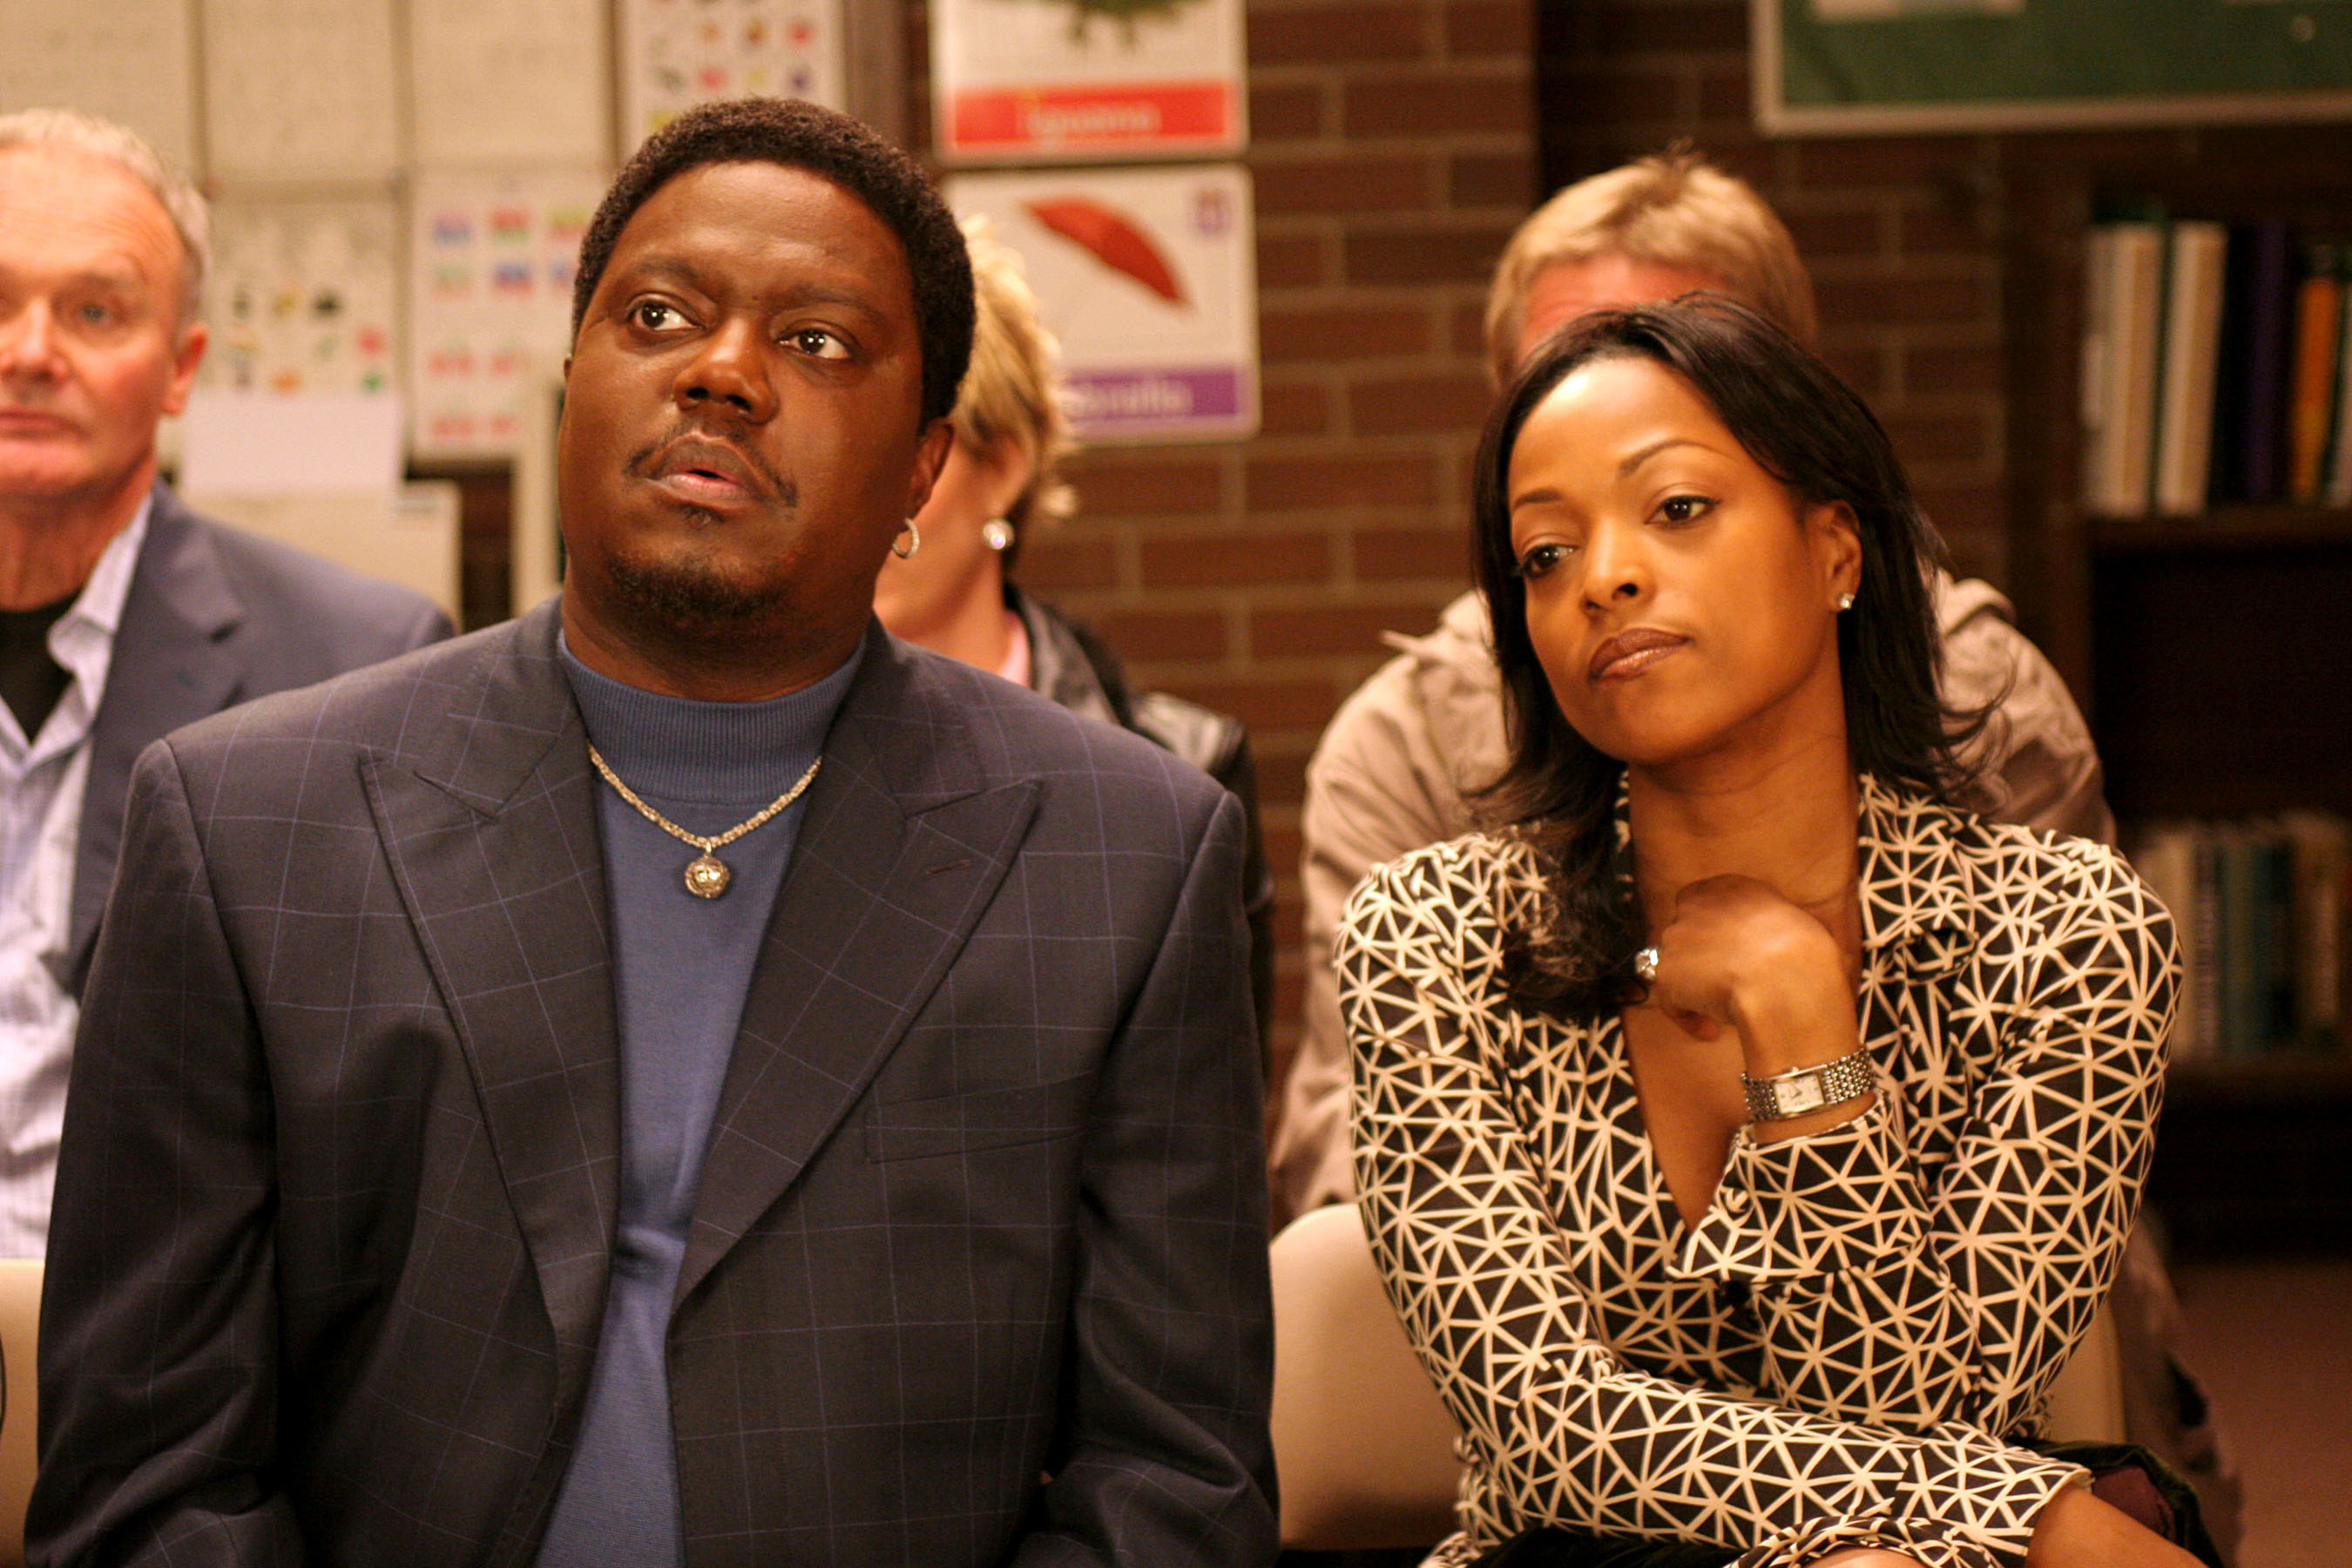 The Bernie Mac Show showcased the ups and downs of life as Bernie and his w...